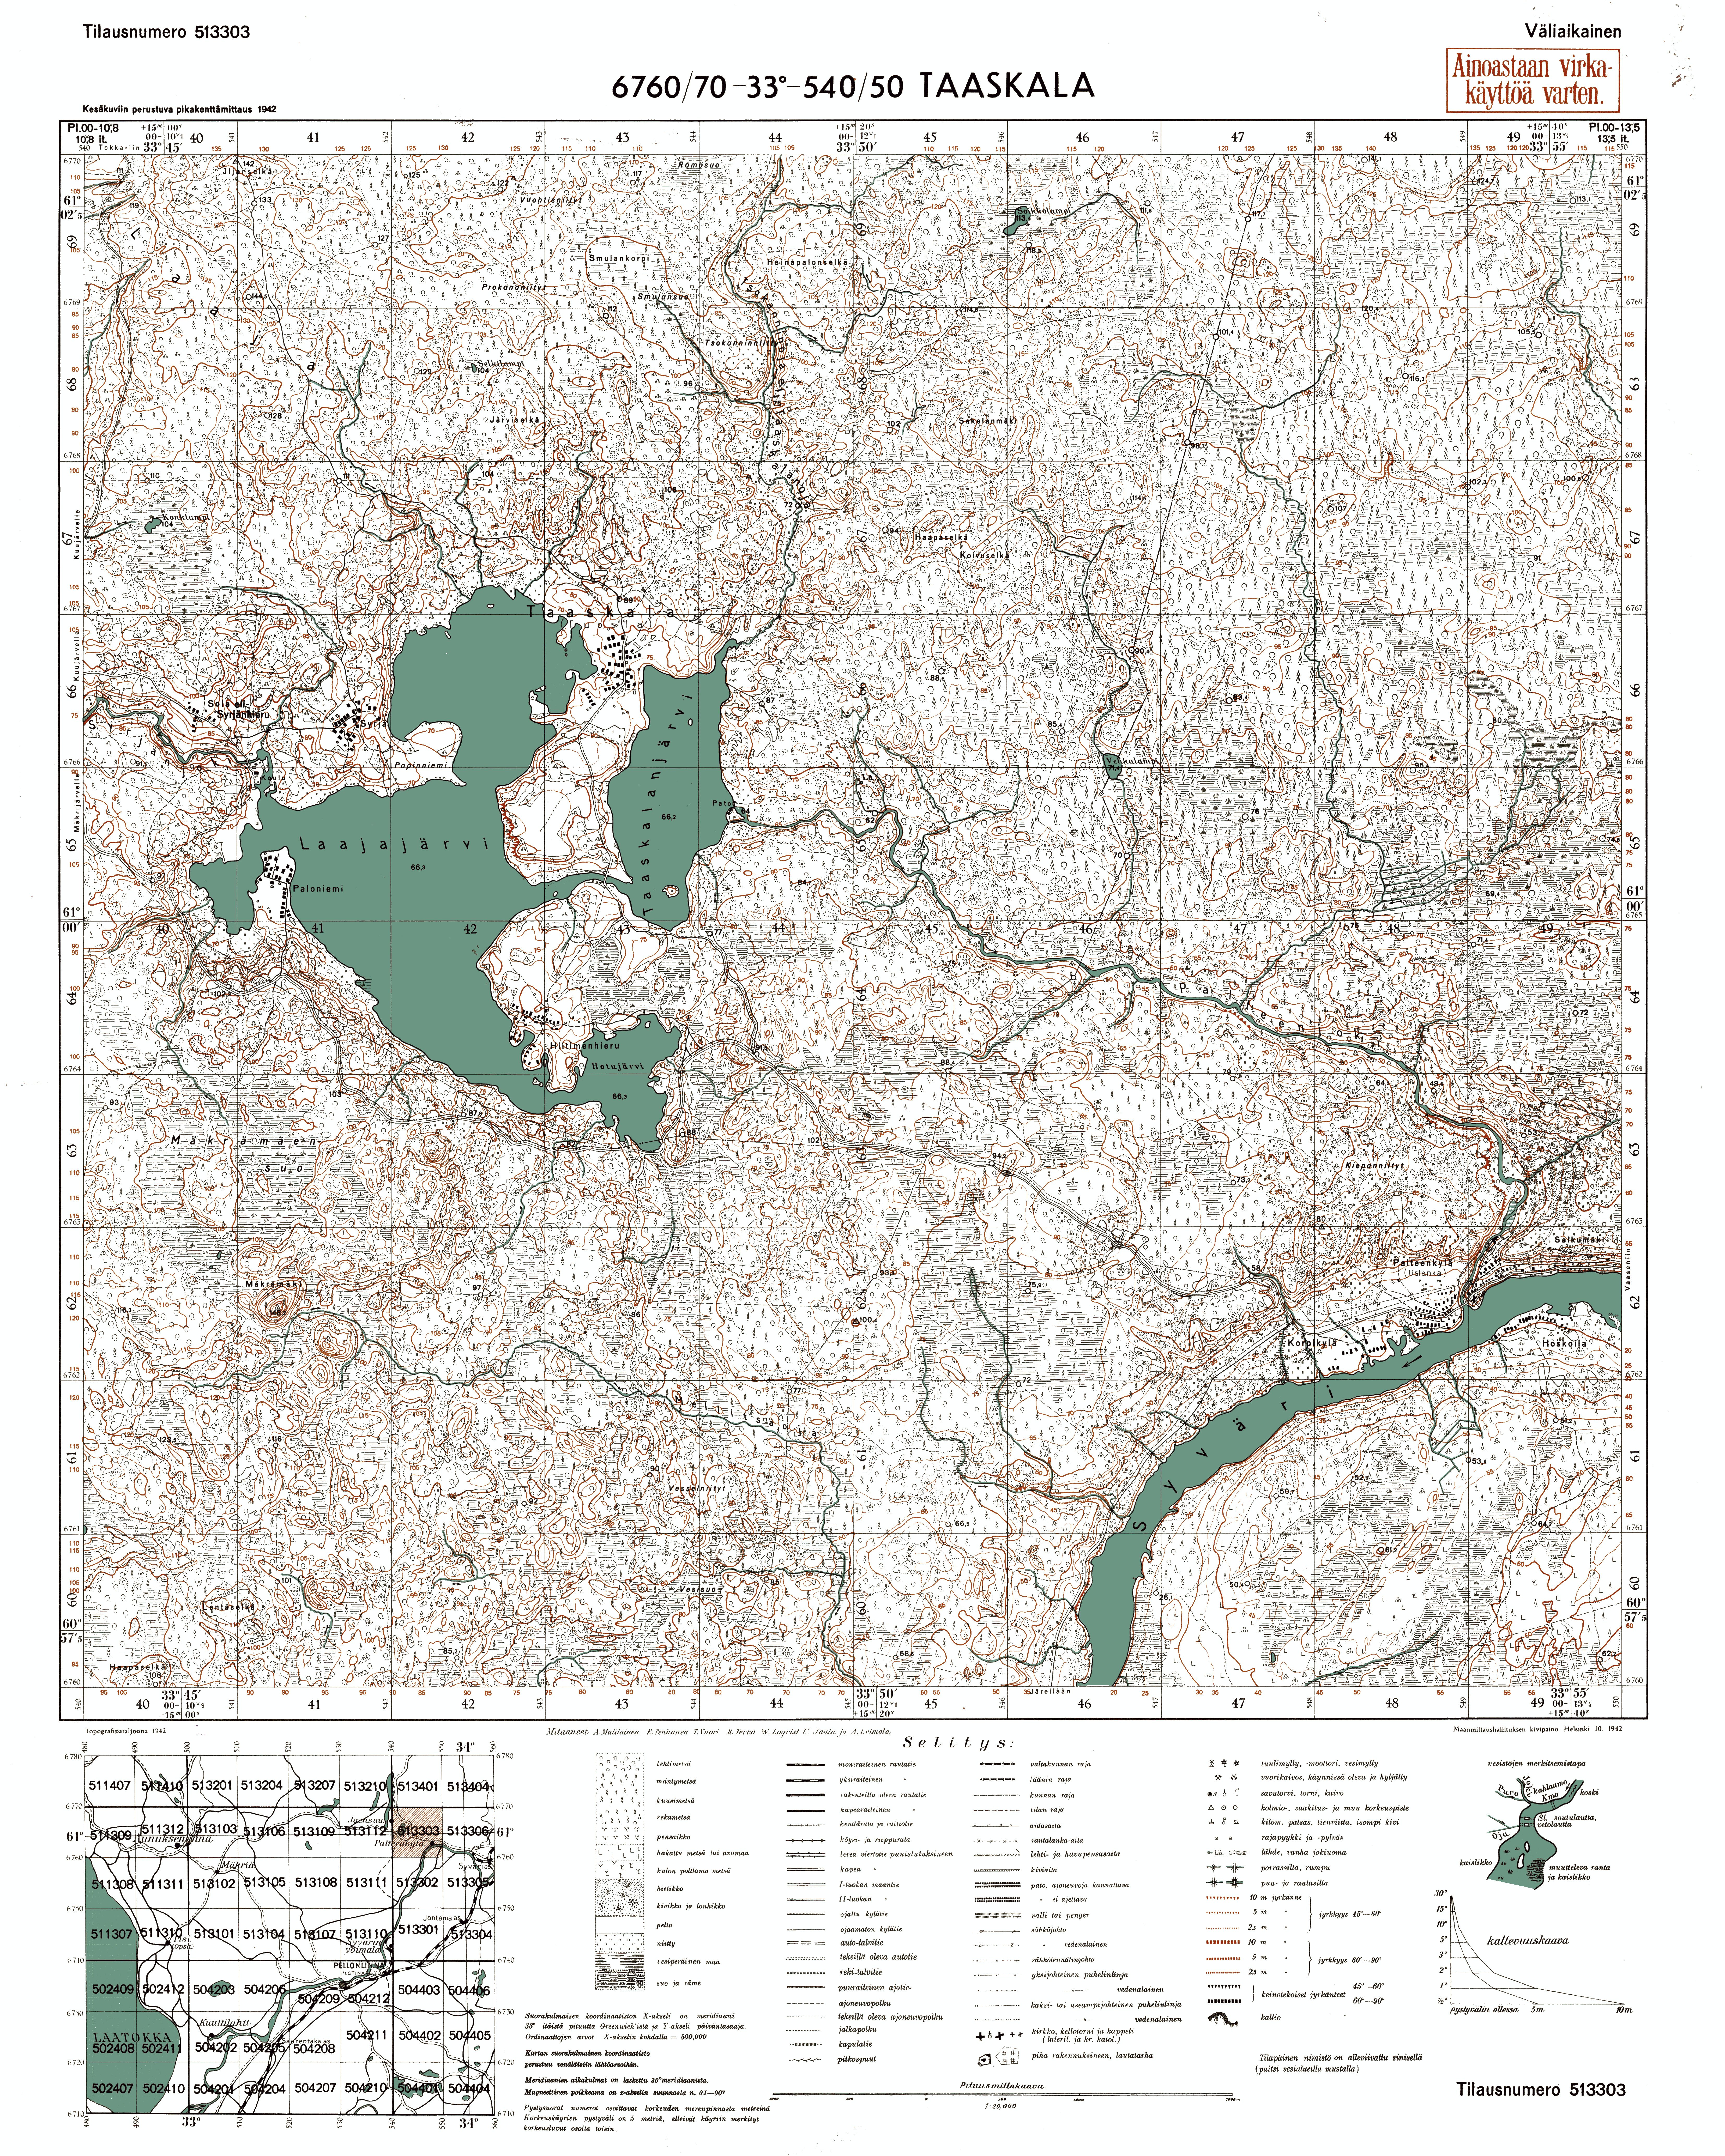 Taškenitsy. Taaskala. Topografikartta 513303. Topographic map from 1942. Use the zooming tool to explore in higher level of detail. Obtain as a quality print or high resolution image